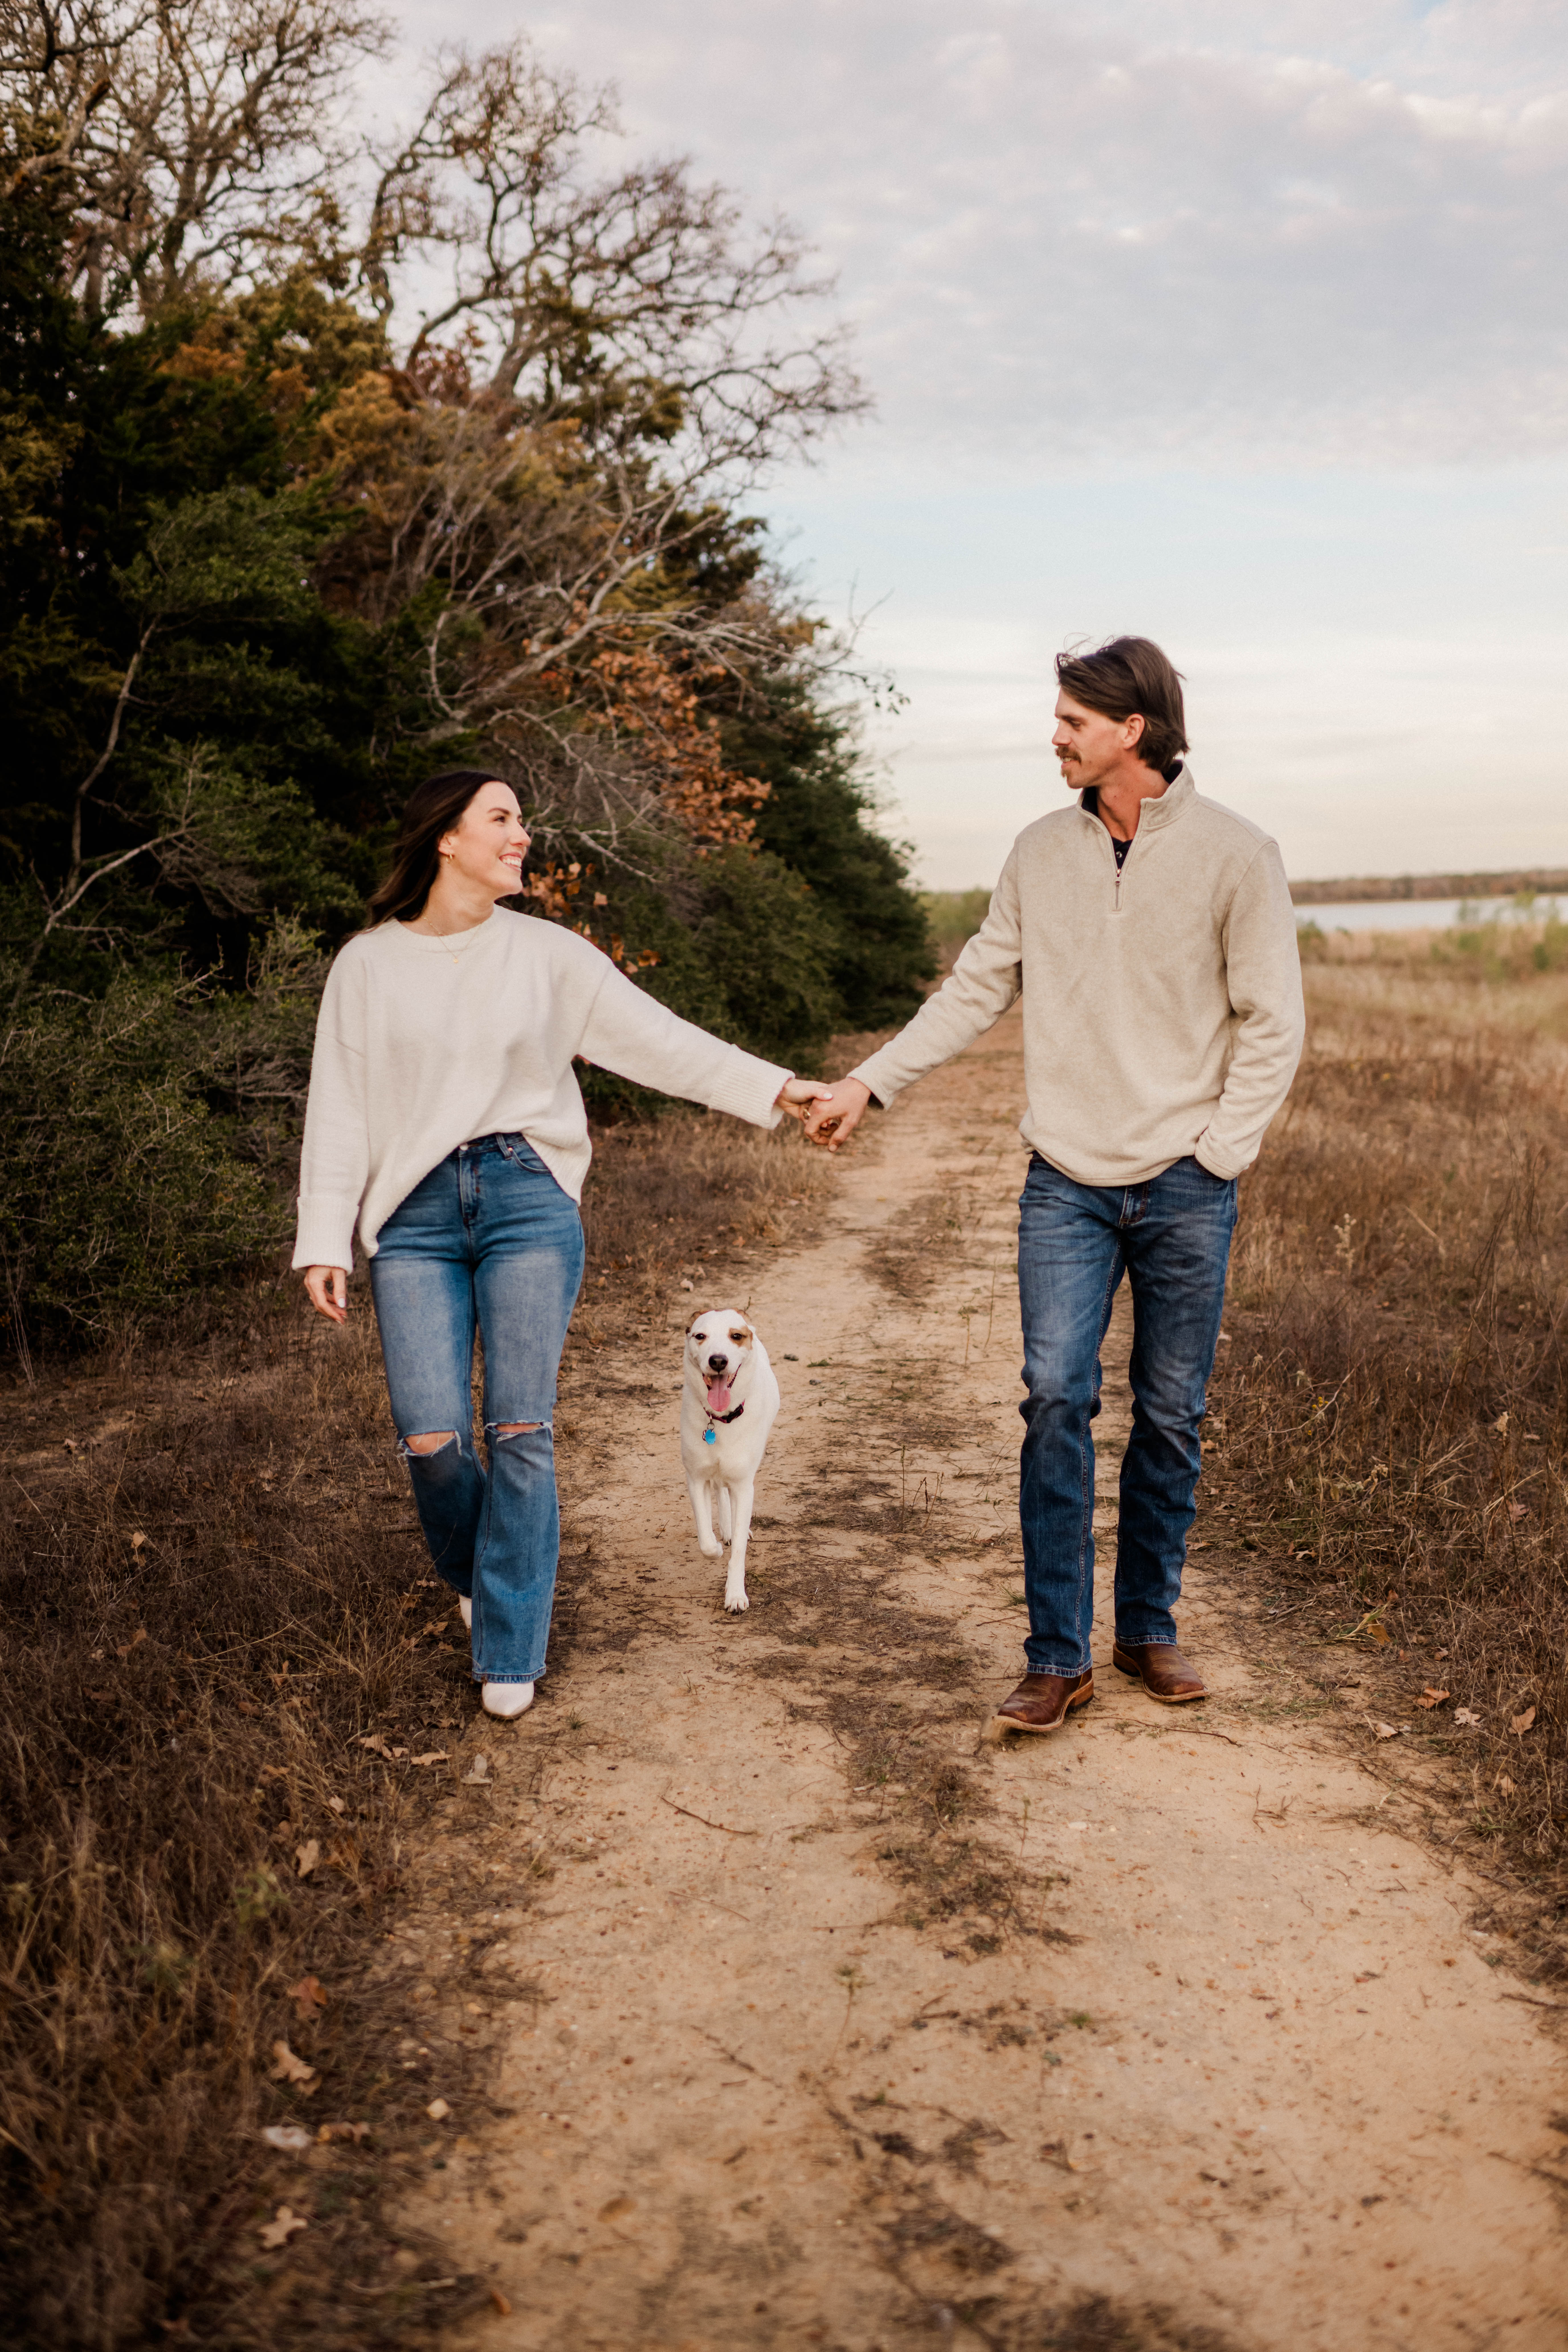 Shelby & Justin's Engagement at Lake Bryan, Texas with Rachel Driskell Photgraphy